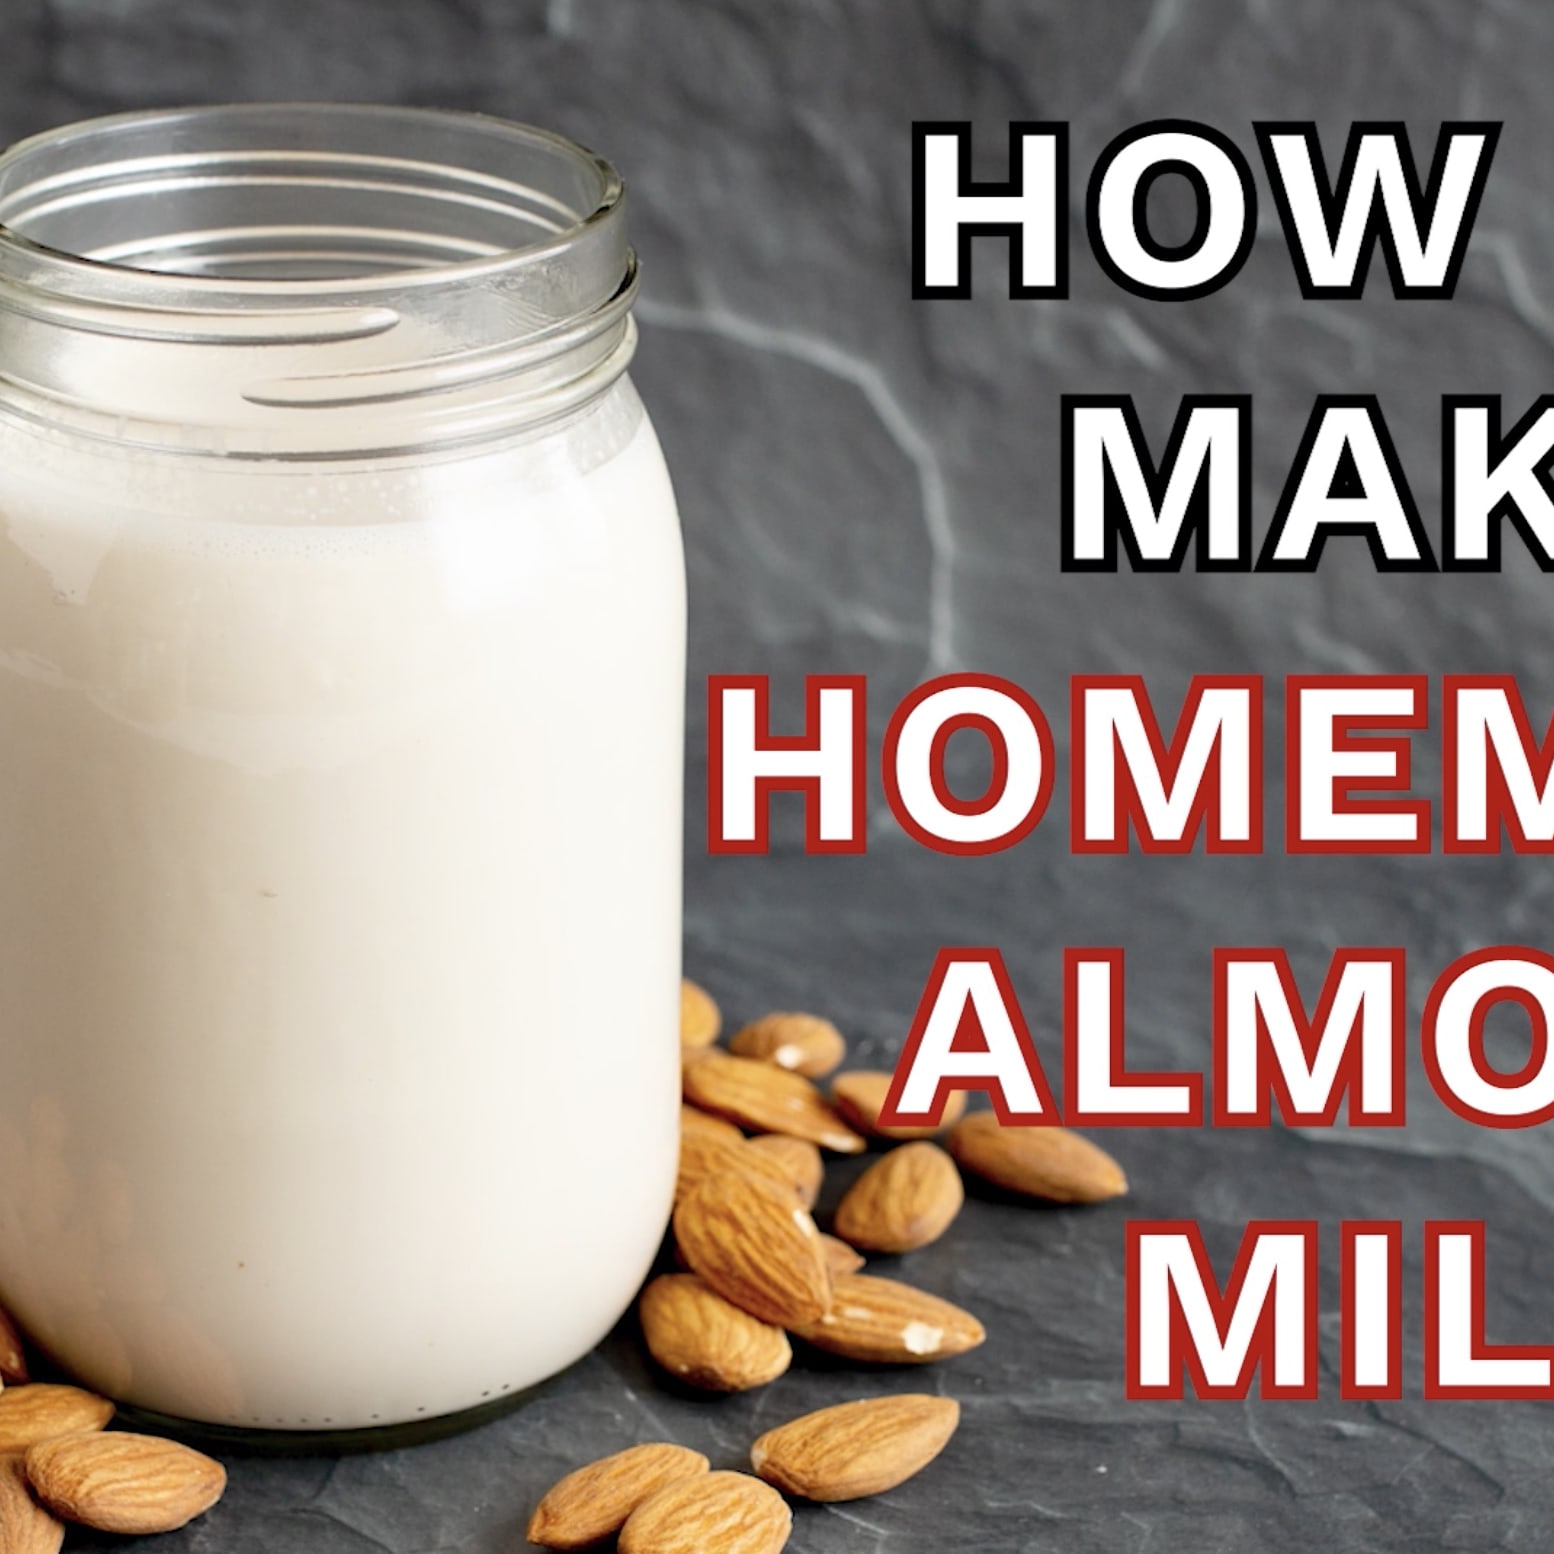 How to Make Almond Milk & More with the Professional Torchietto (Vegetable/Fruit  Press) 